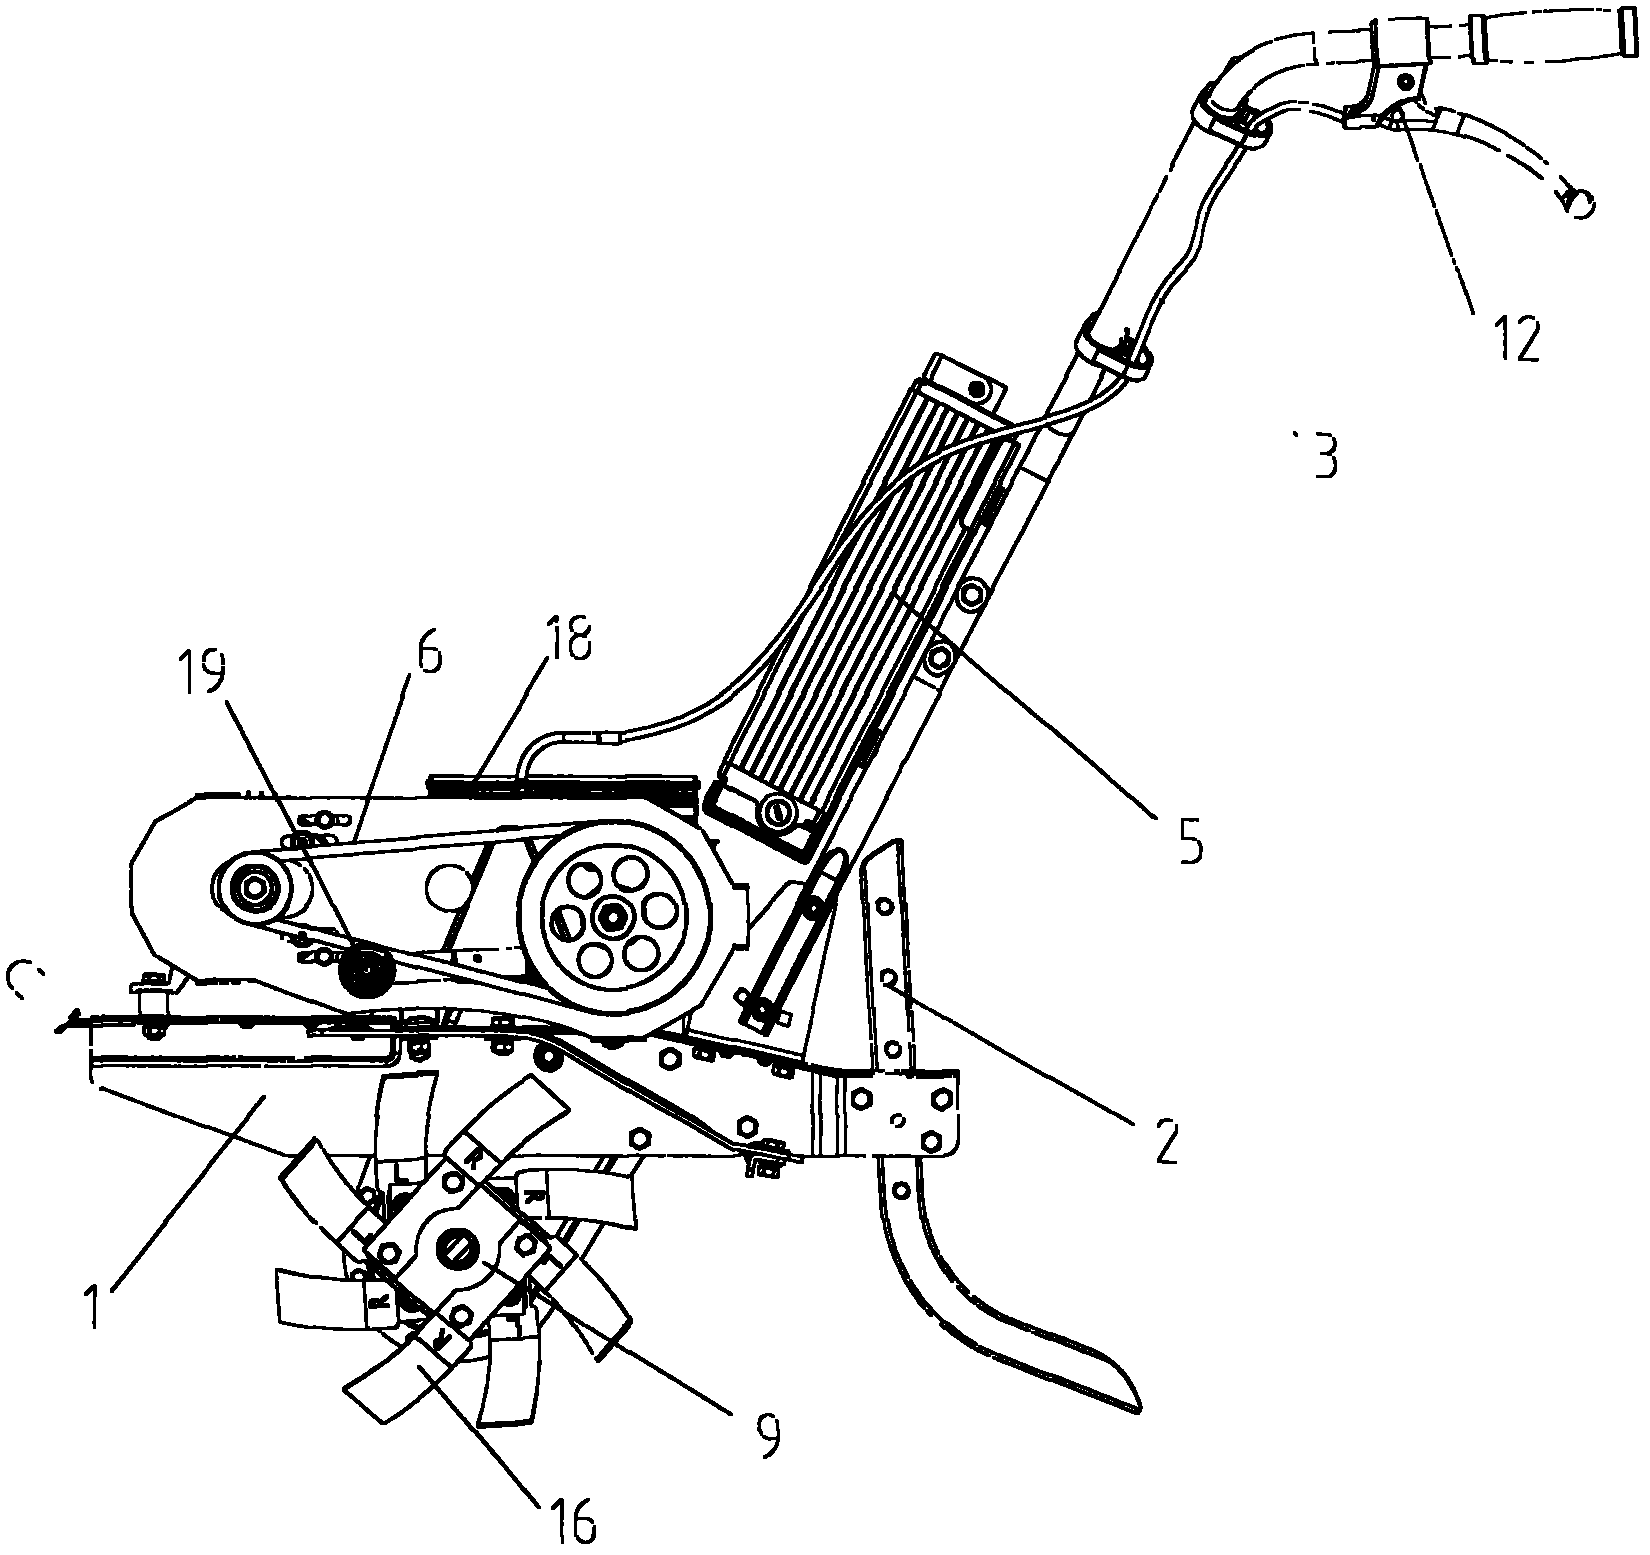 Direct-current rotary cultivator